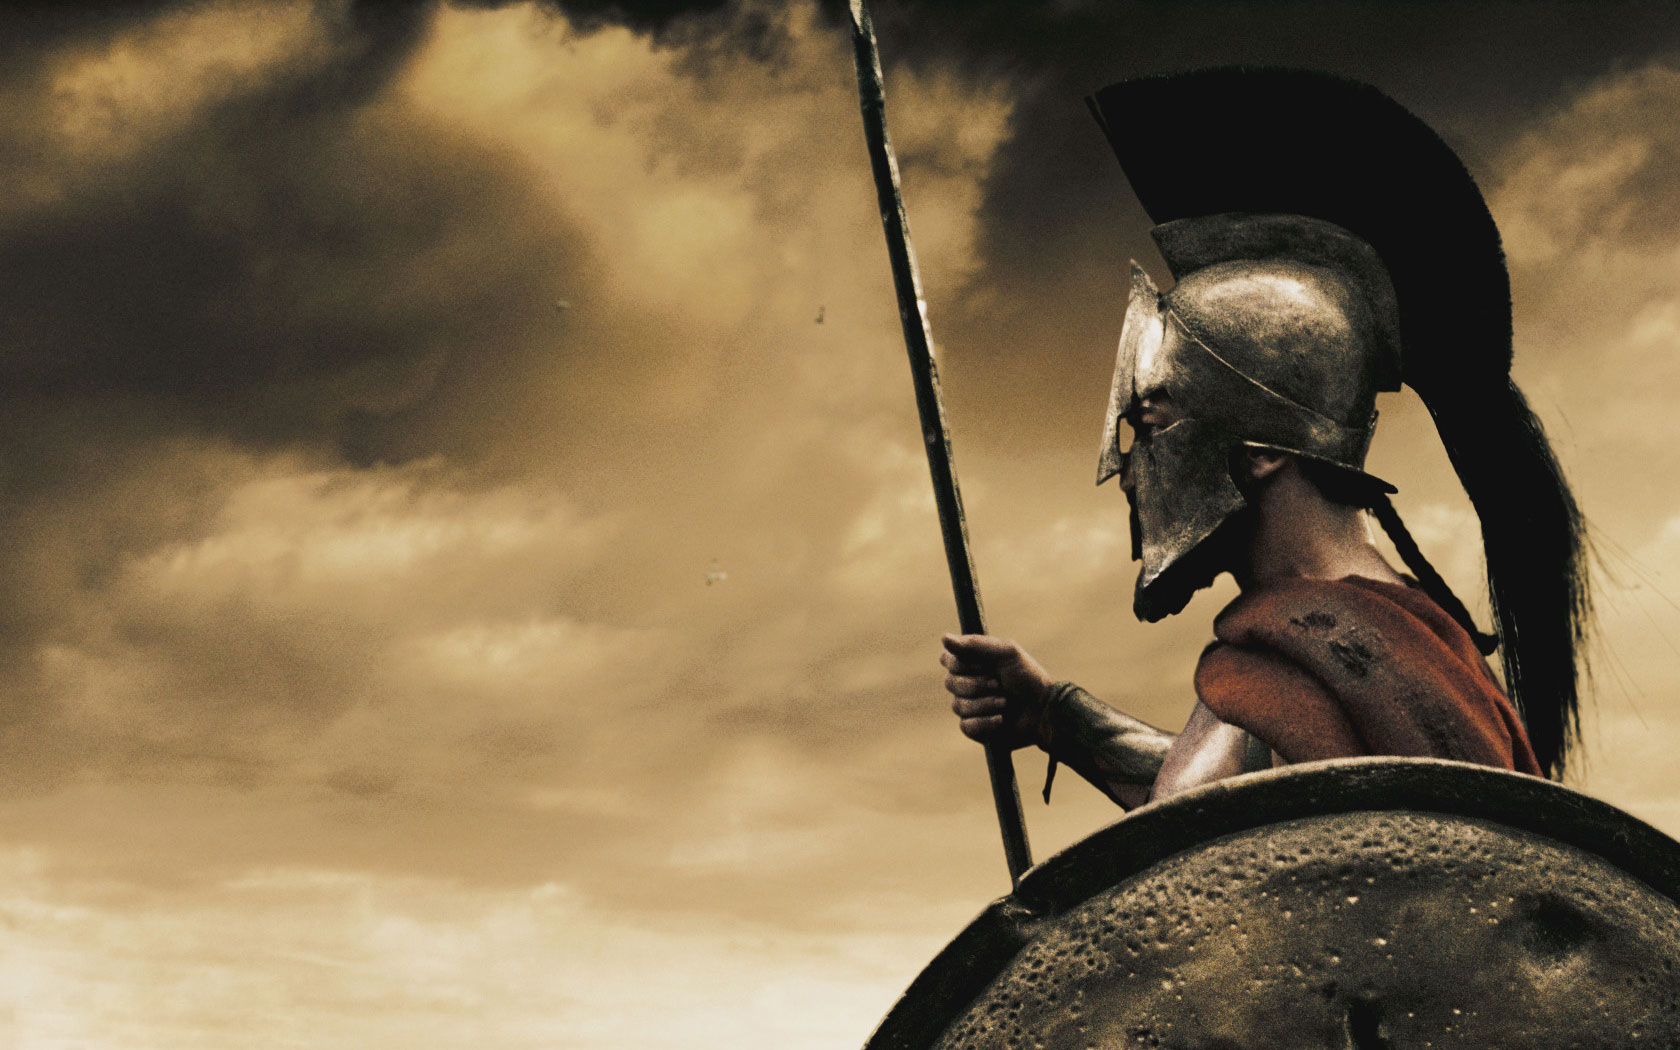 King Leonidas, portrayed by Gerard Butler, in the movie 300.